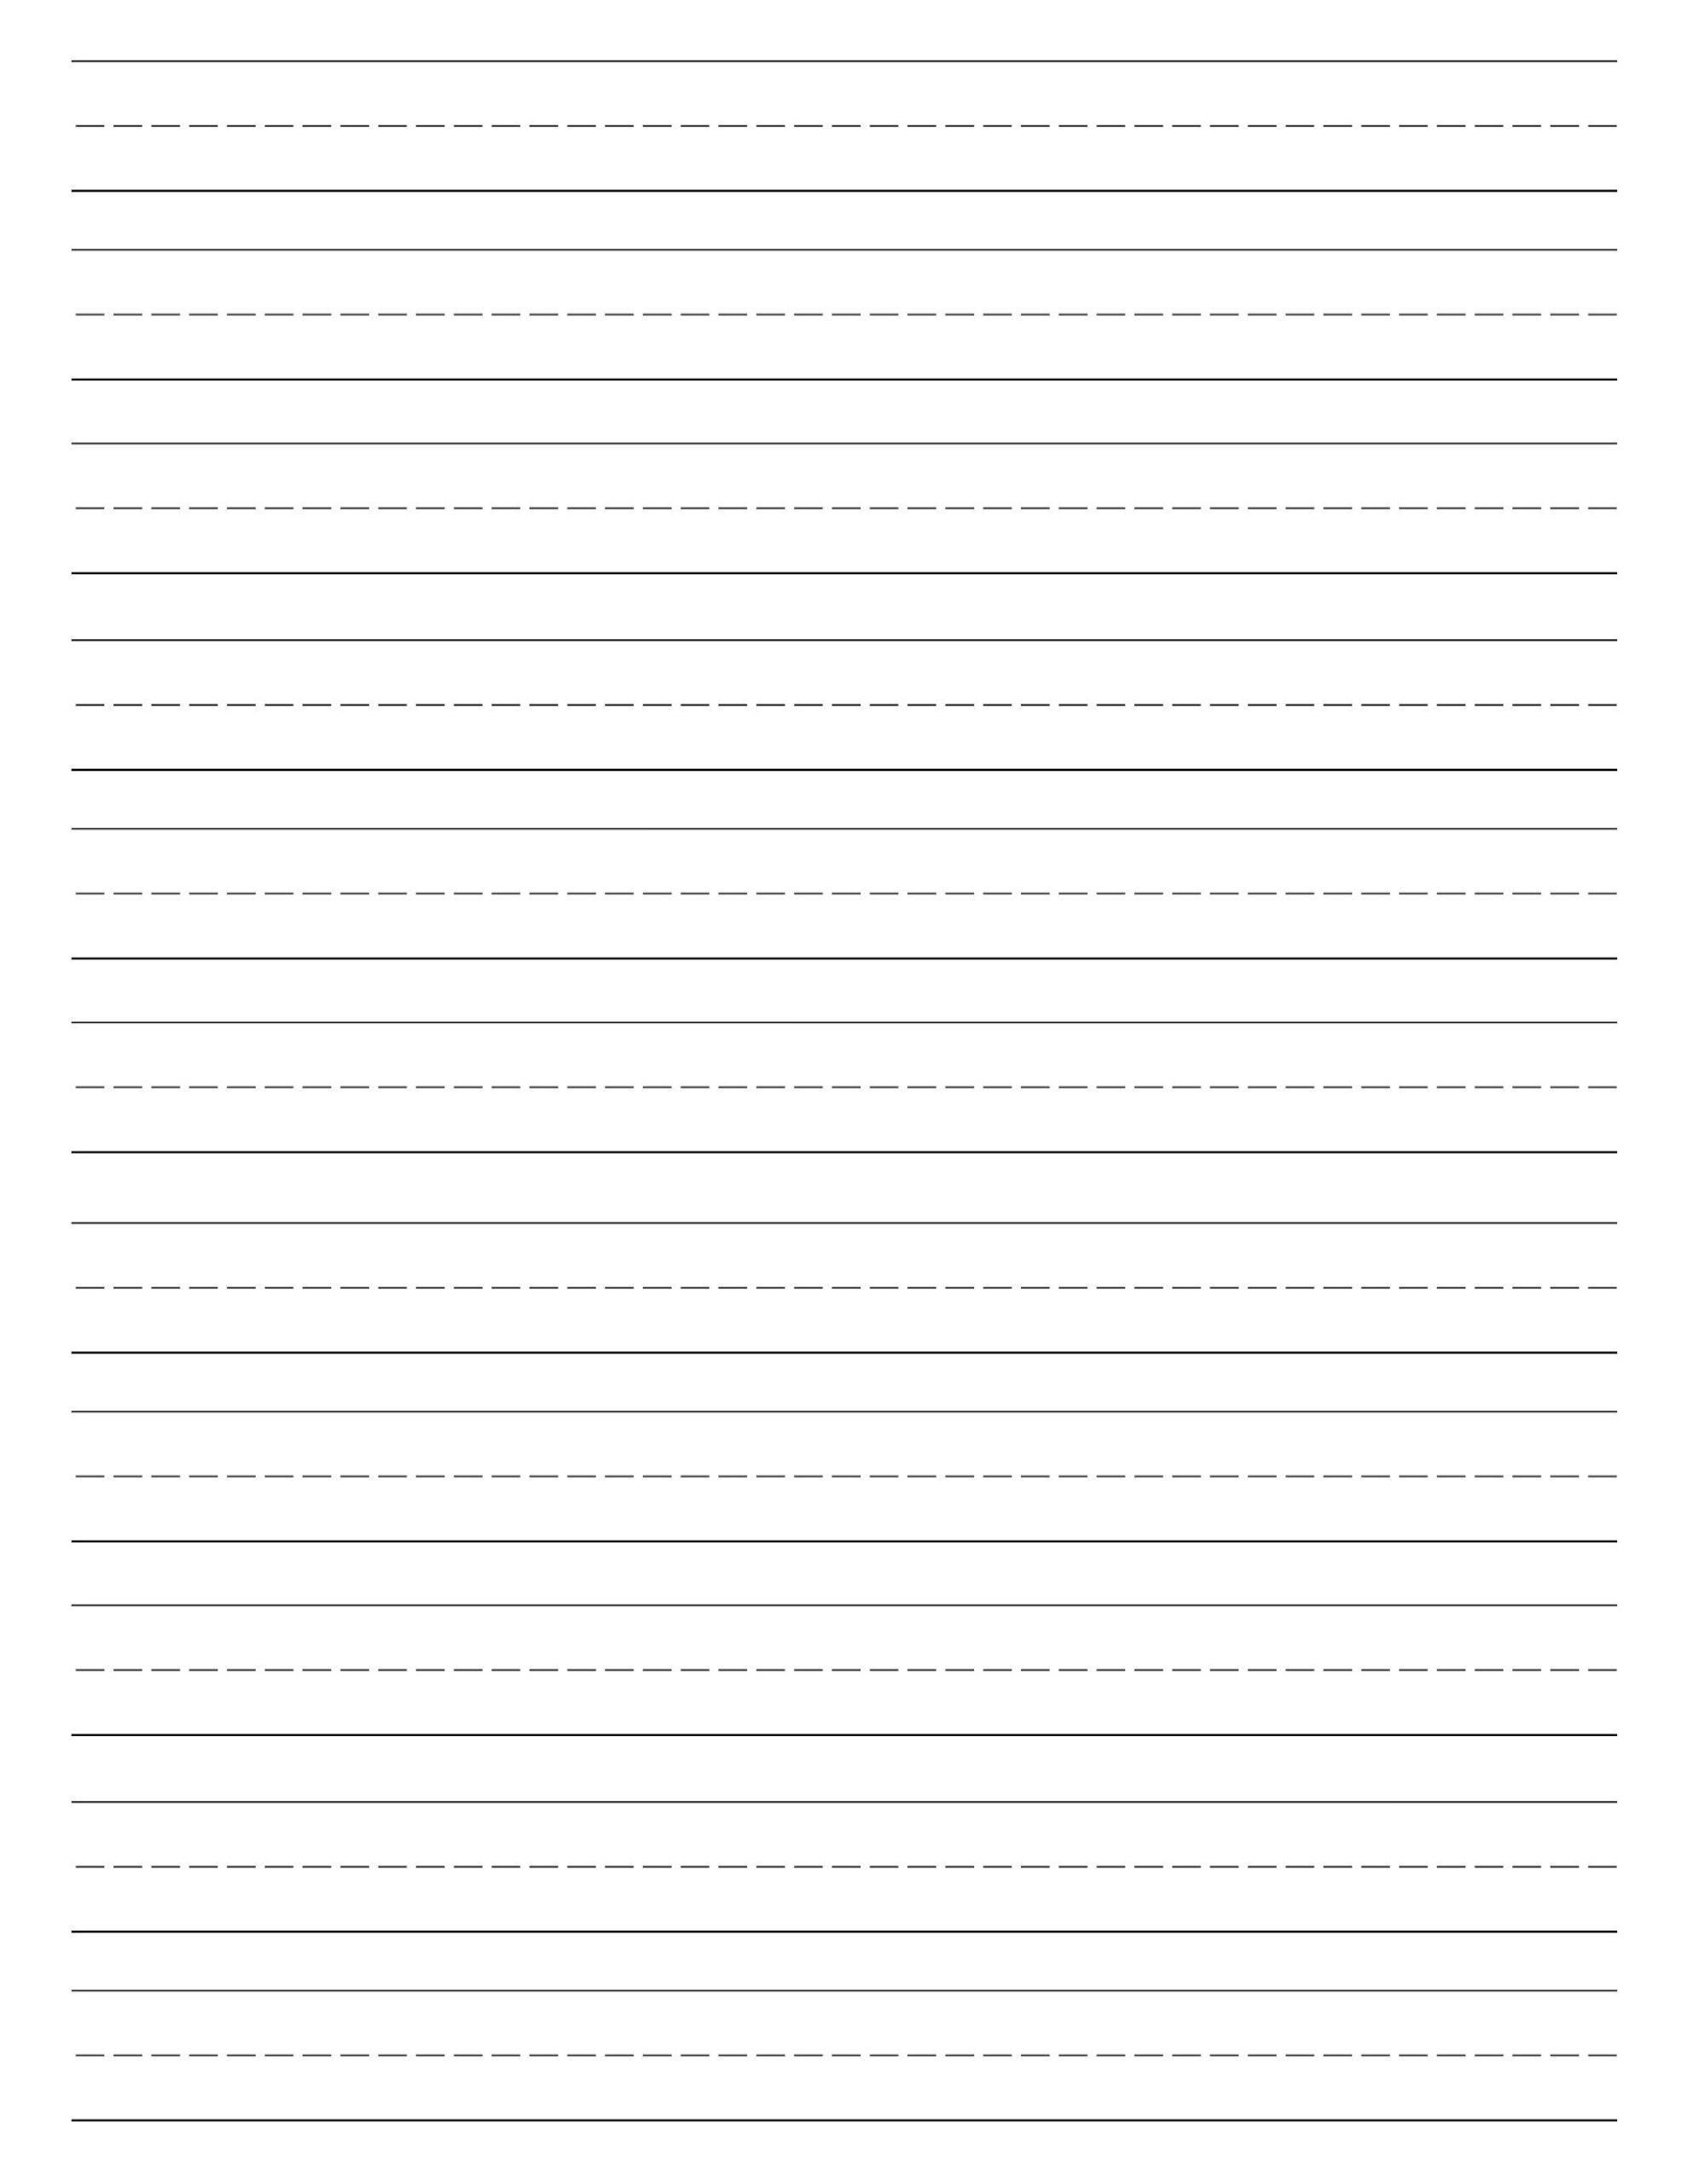 Lined Handwriting Paper Printable Free